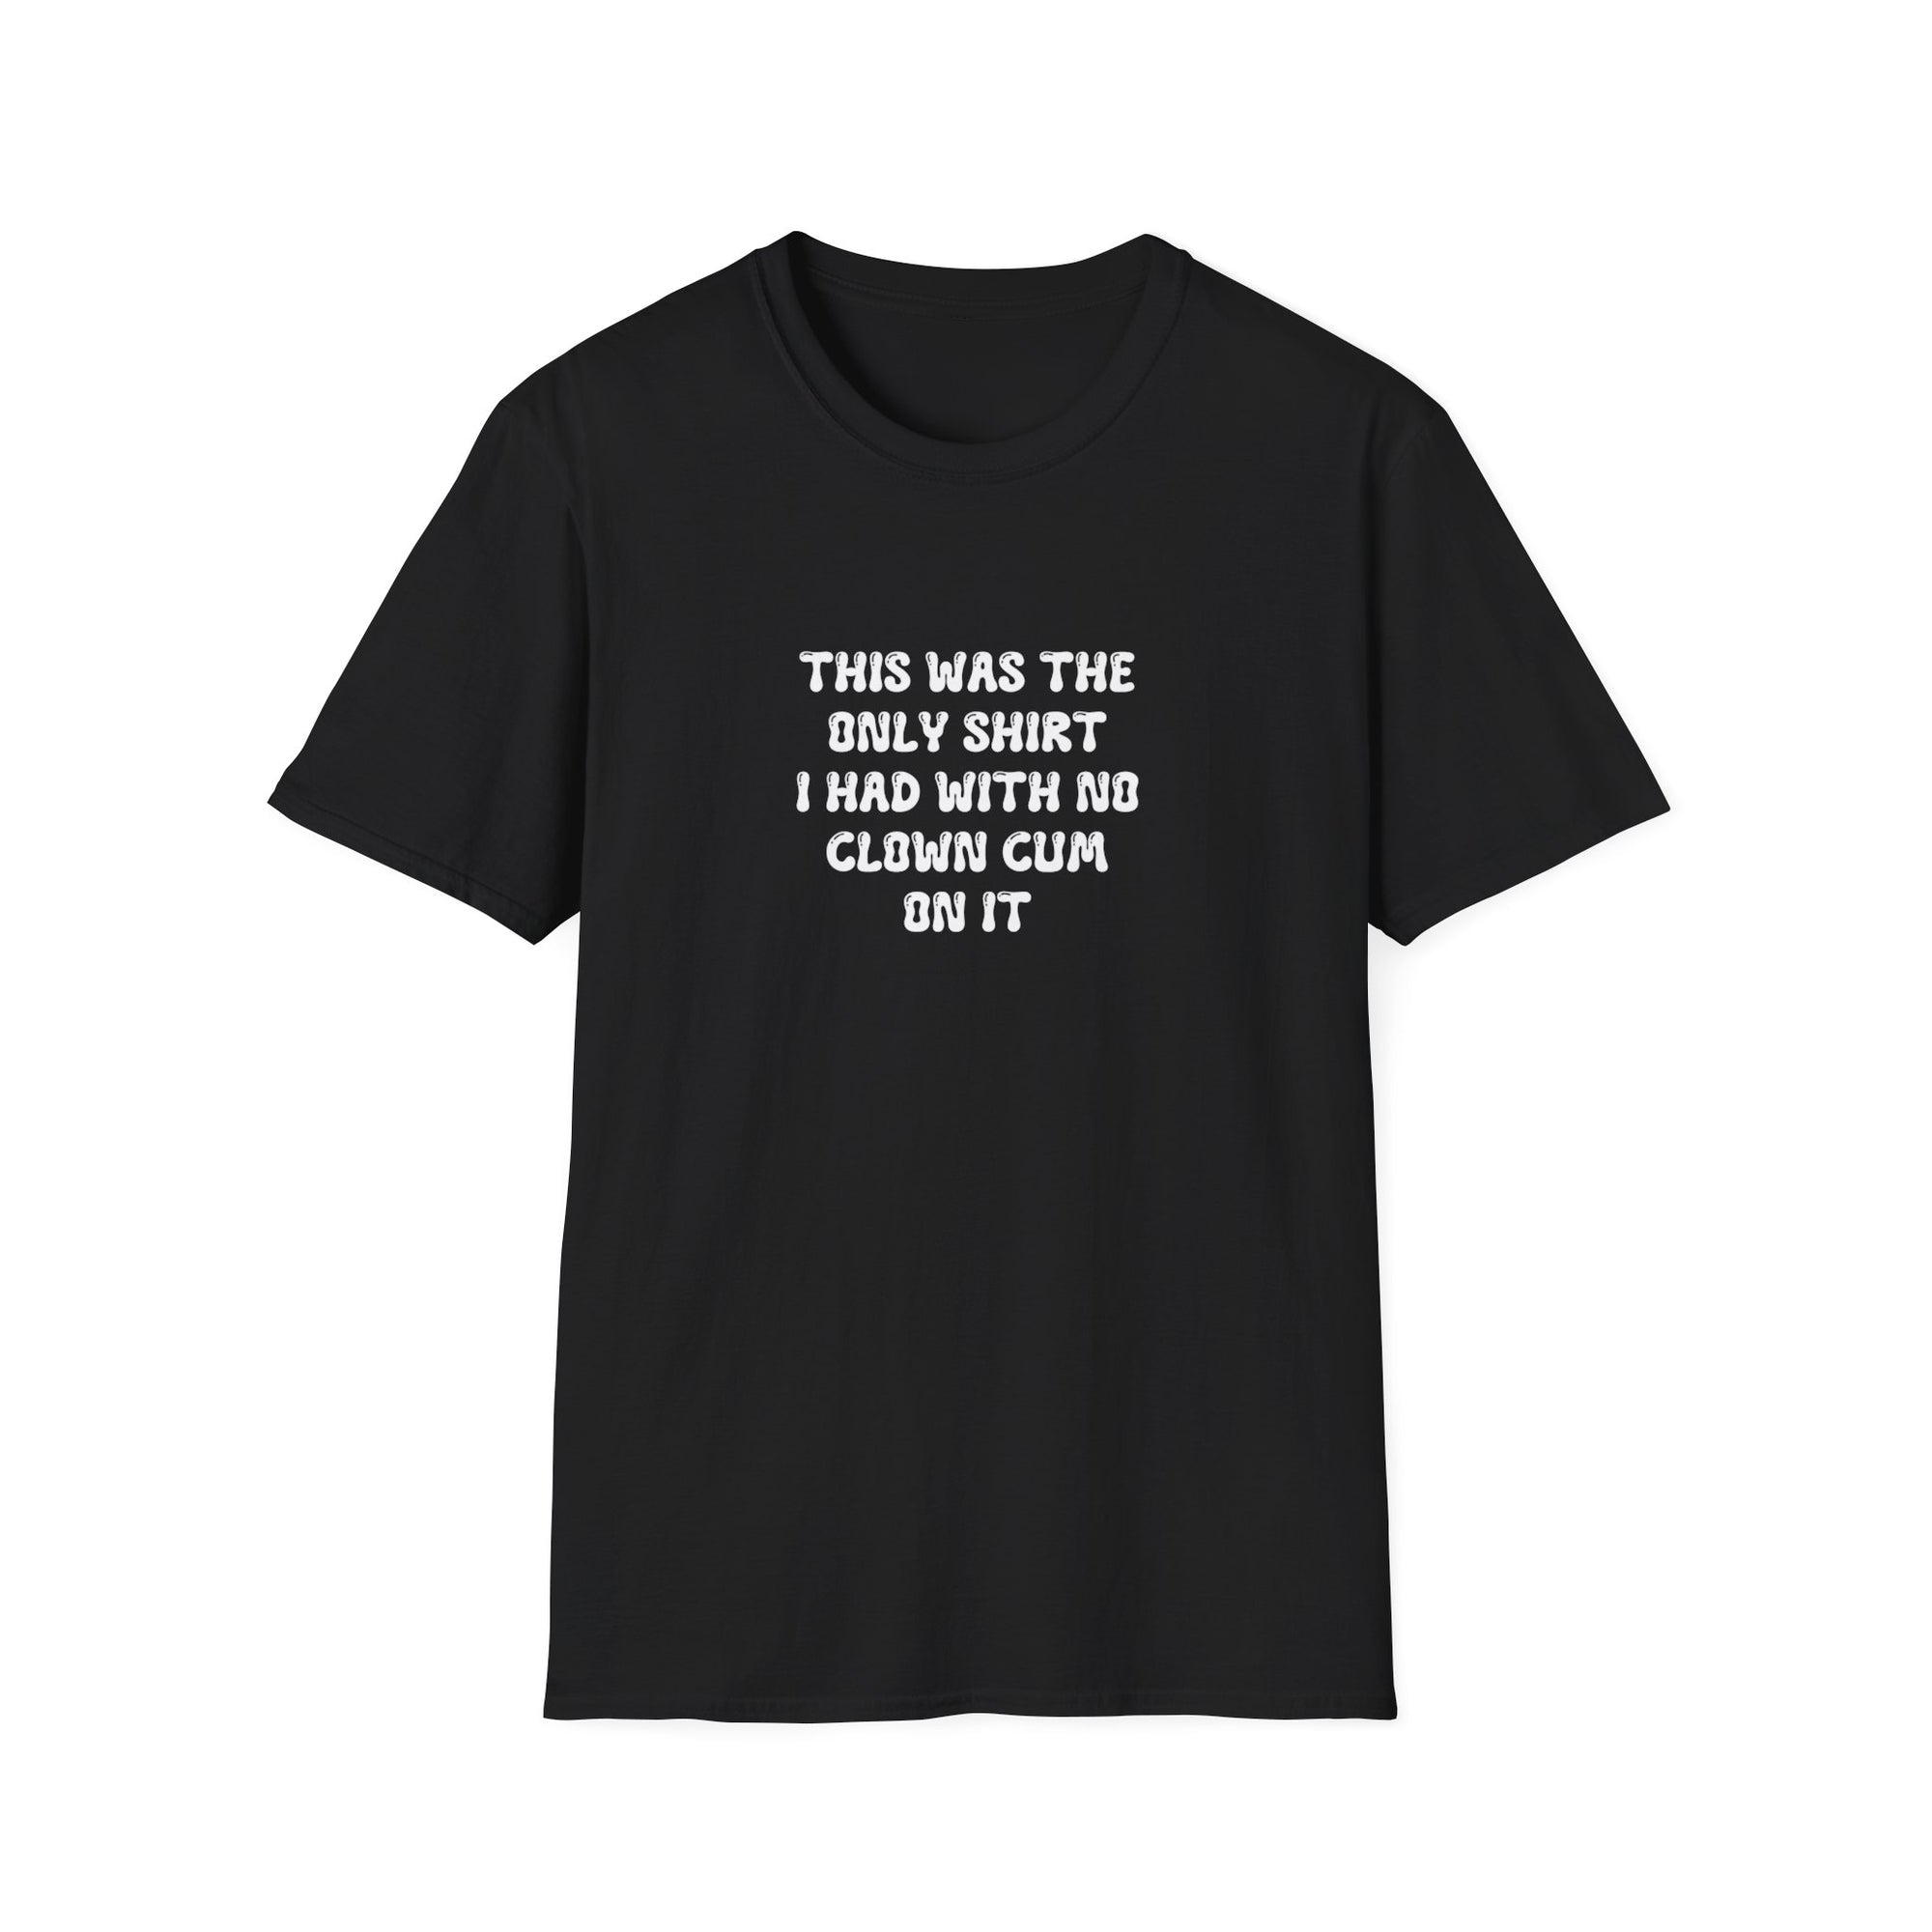 THIS WAS THE ONLY SHIRT I HAD WITH NO CLOWN CUM ON IT (white) - Unisex Shirt